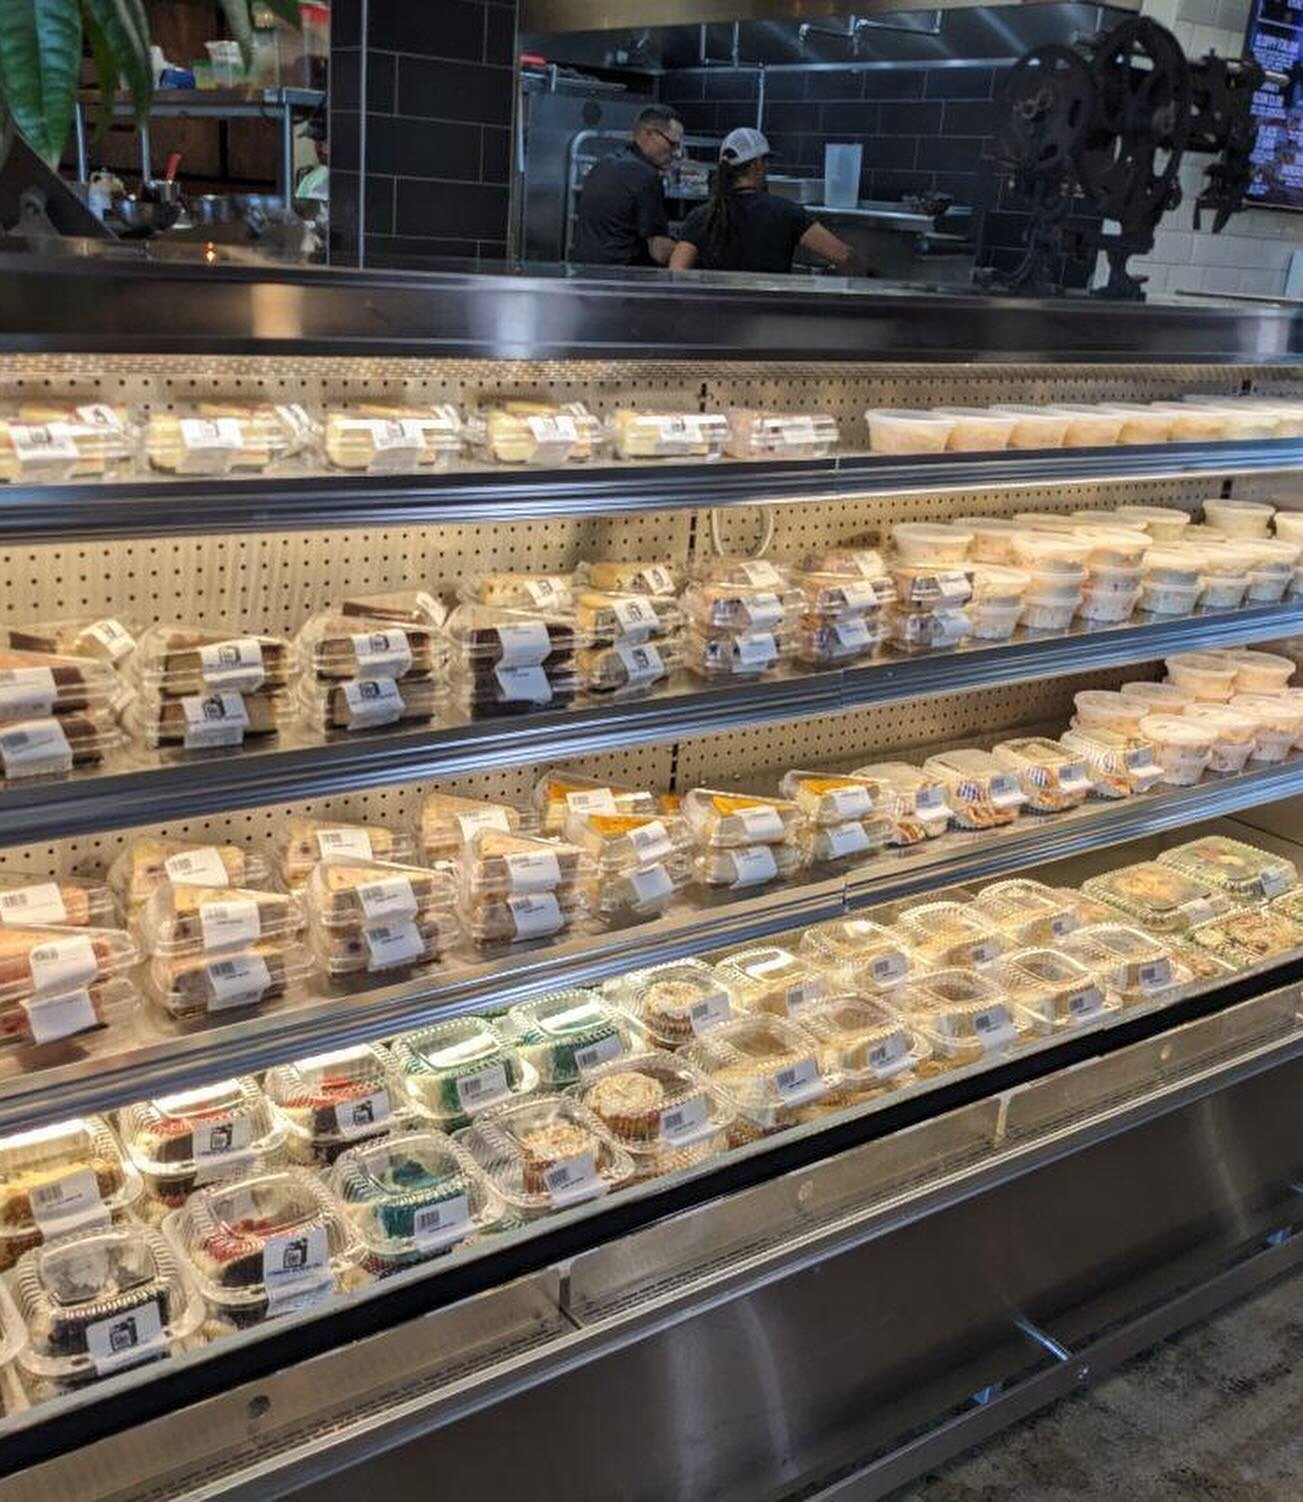 SHINY &amp; NEW! Our Deli Case just got a major upgrade with more room to fit your requests for grab and go meals. Stop in to see it and grab the Cinco de Mayo special (Brisket Huevos Rancheros) , today only, while you&rsquo;re here!

FEATURES:
- Hou